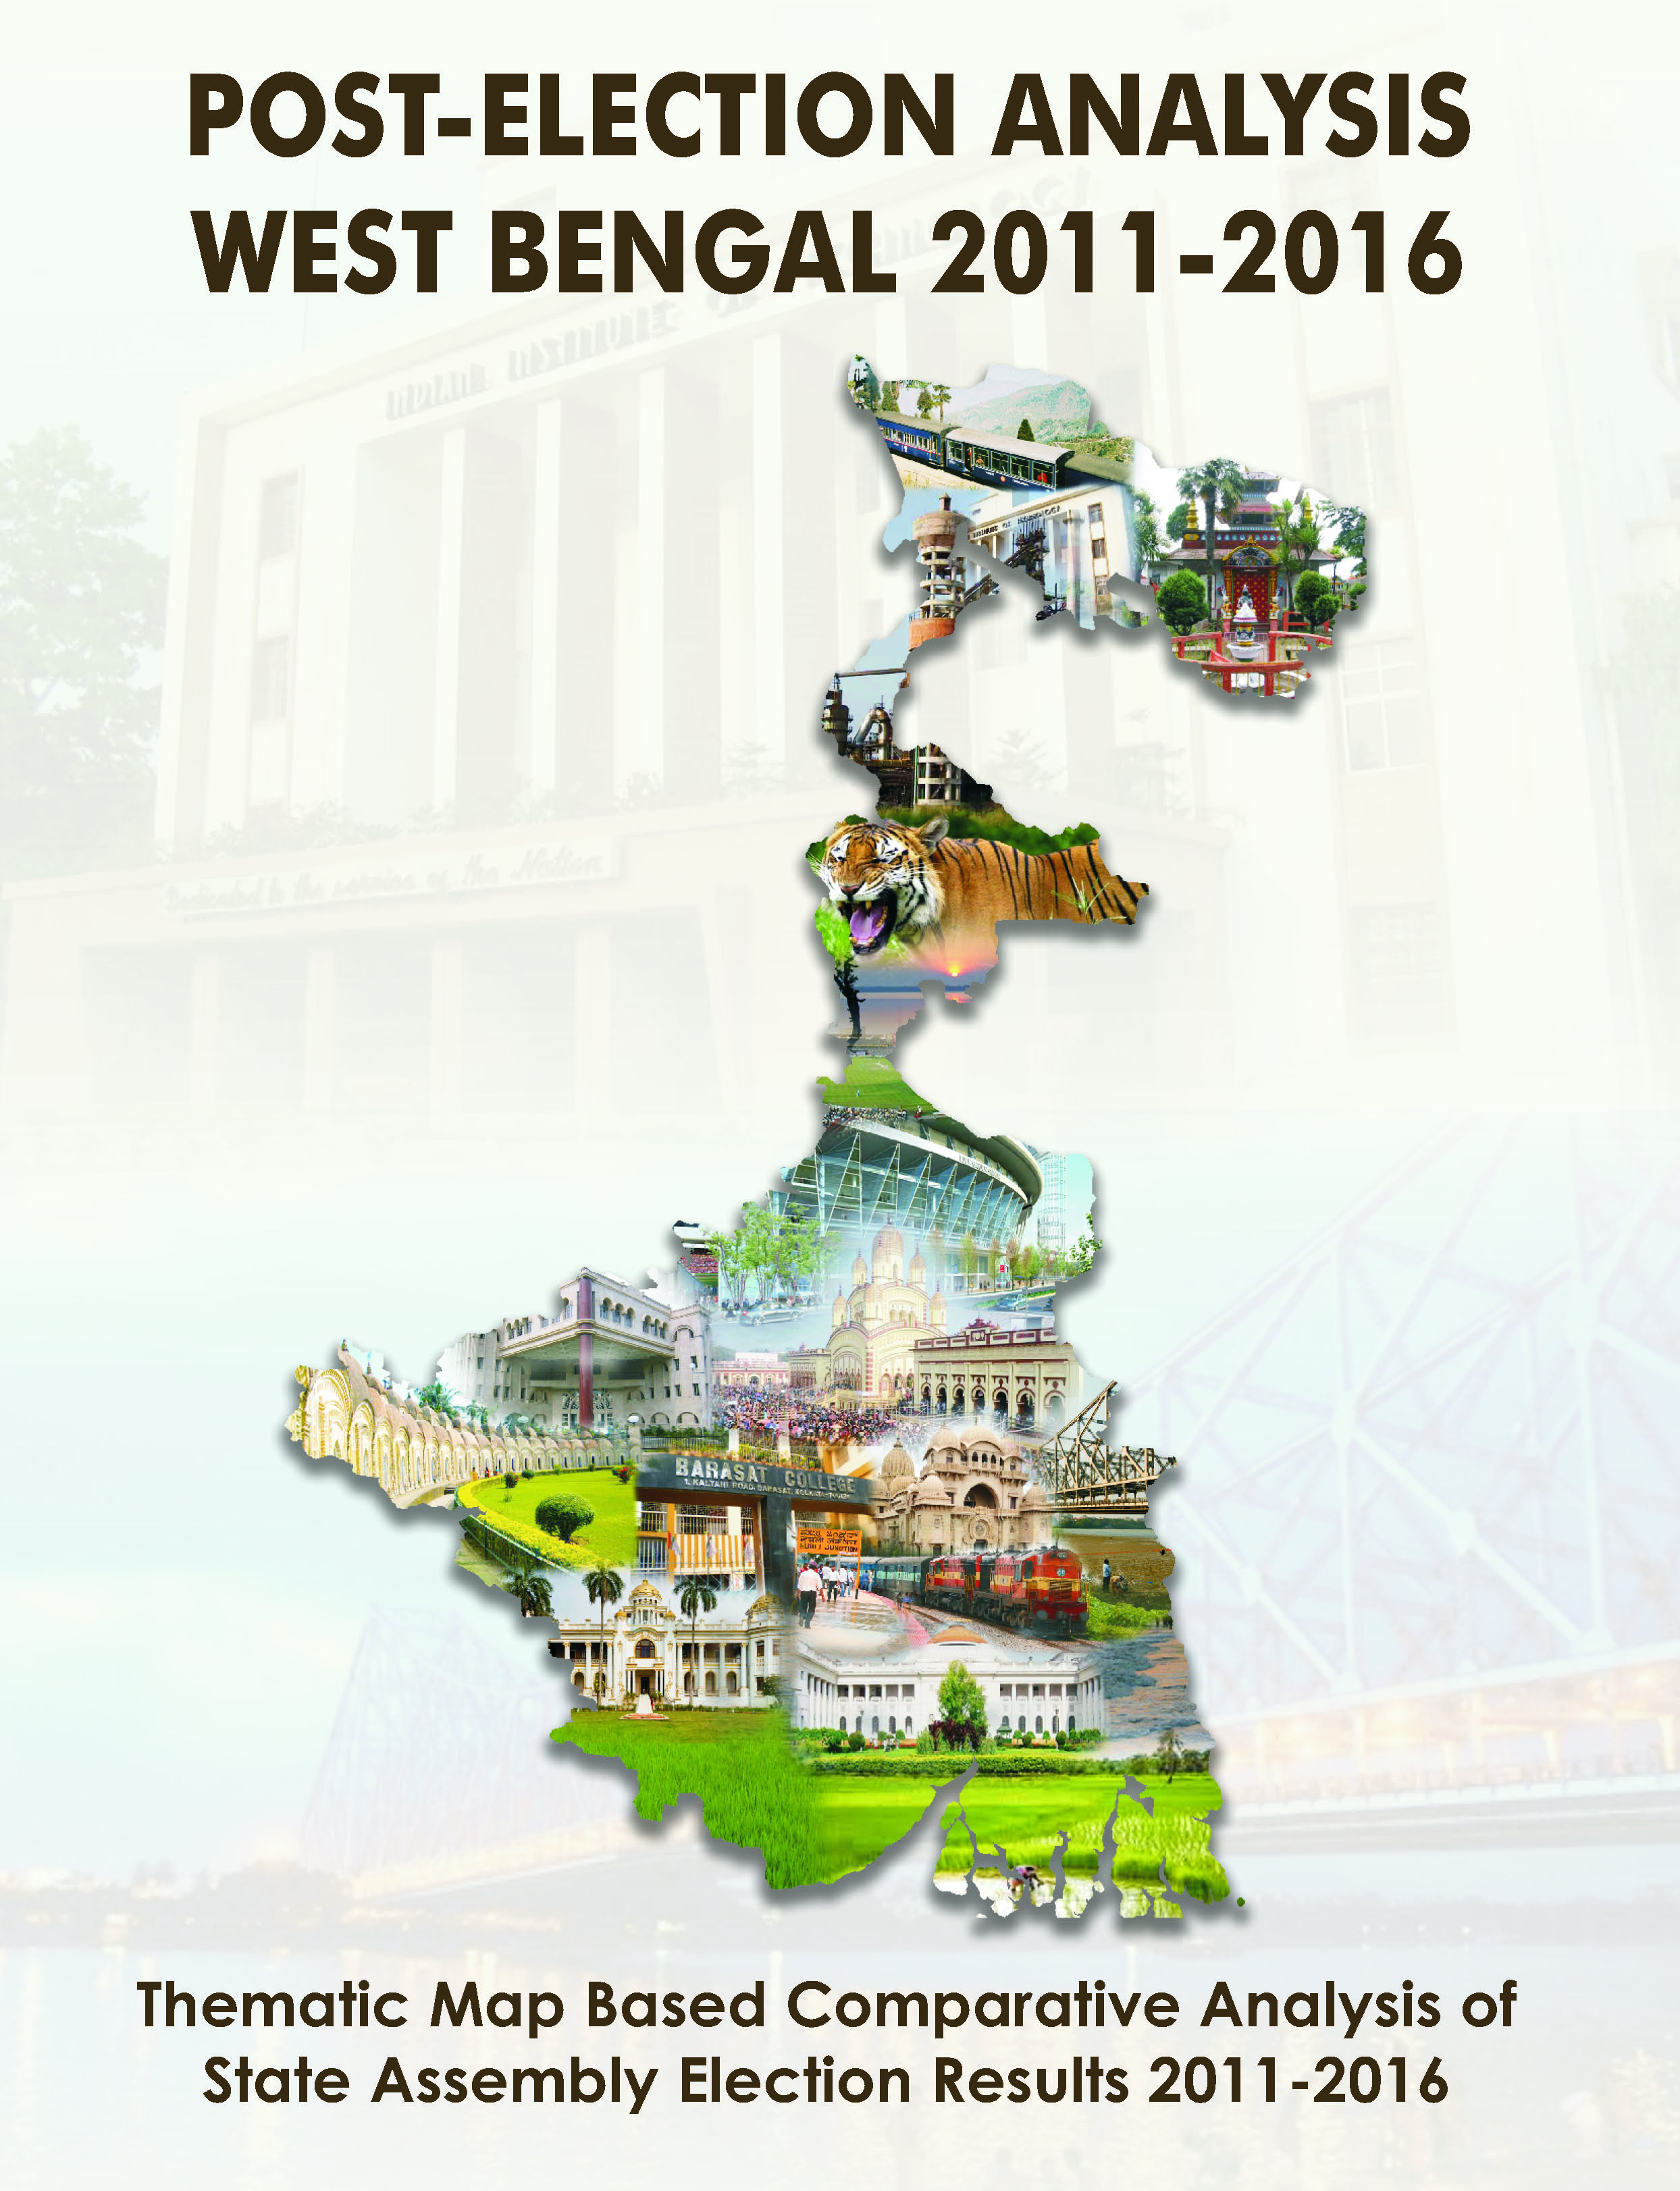 Analysis of West Bengal State Assembly Election Results 2011 - 2016